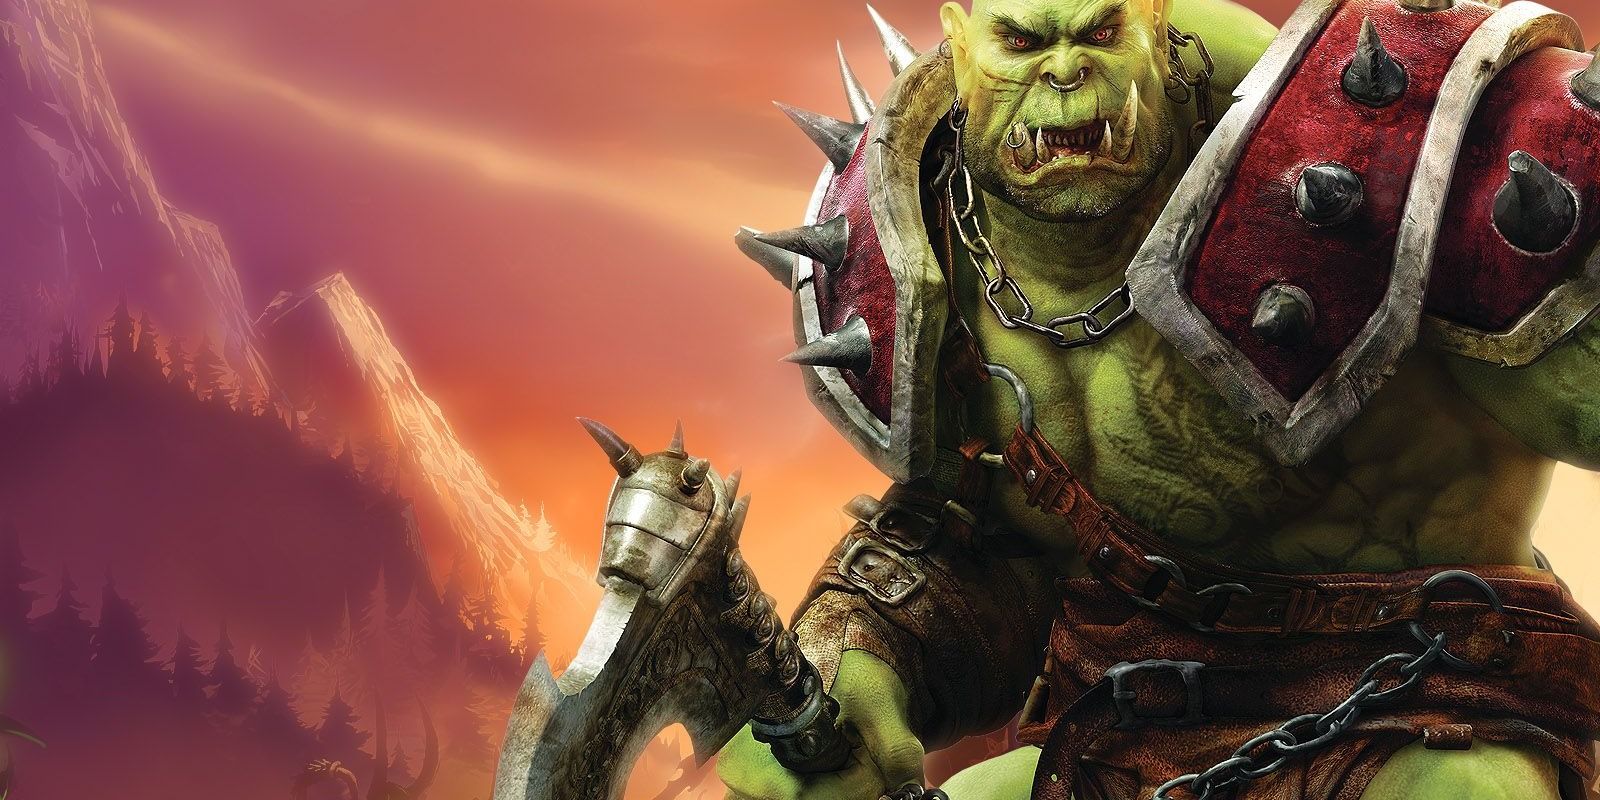 Orc warrior with ax, big shoulder pads and mounatins in the background, promotional art for World of Warcraft.